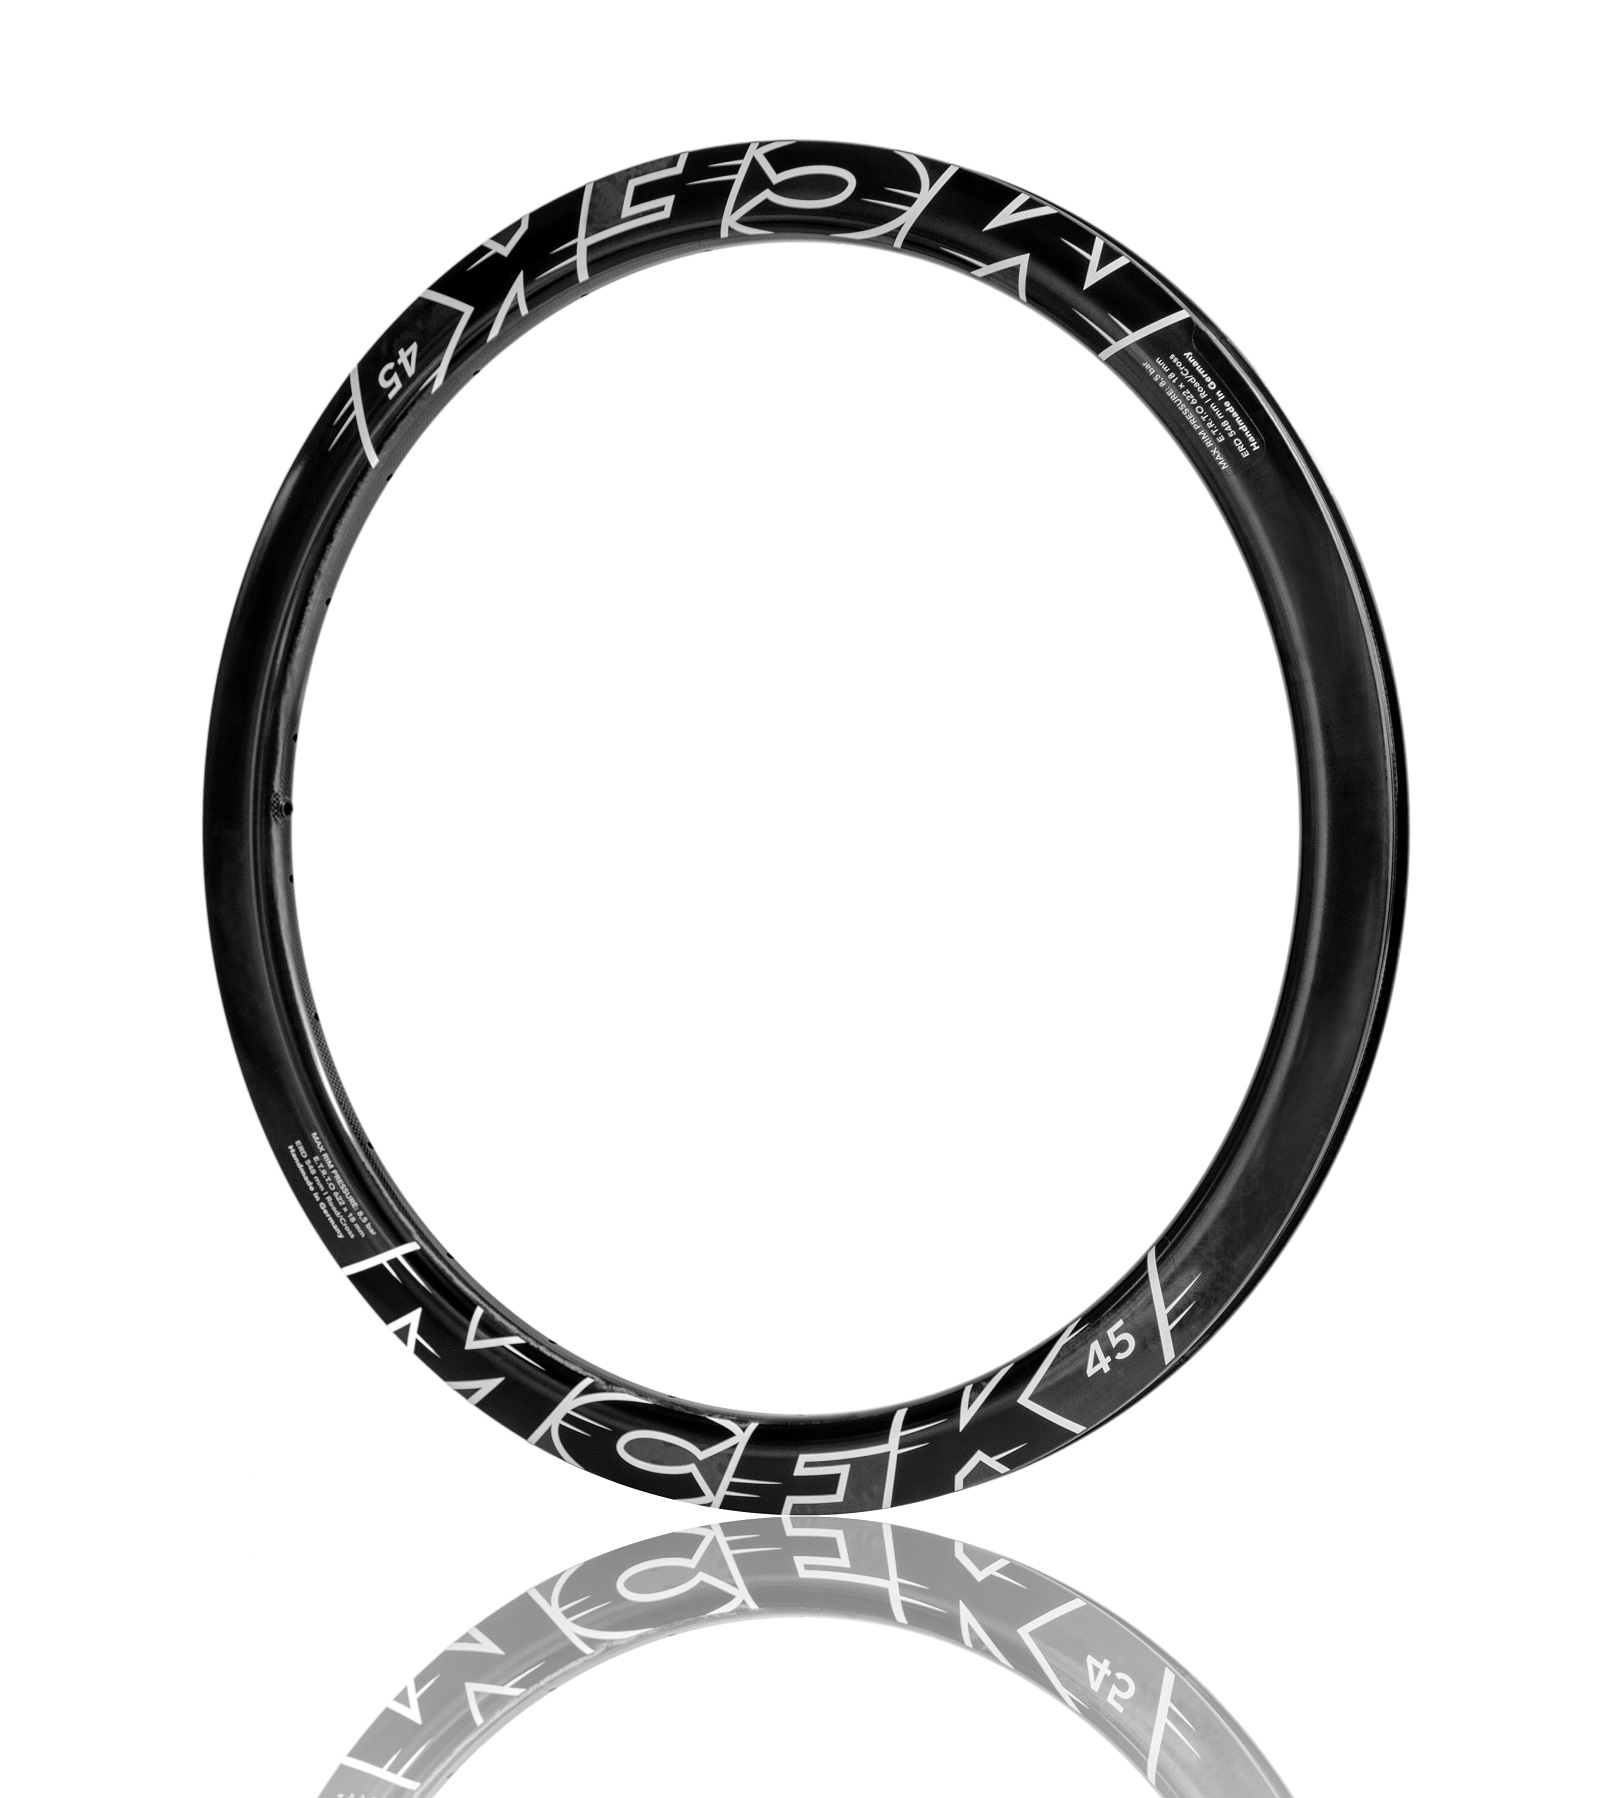 Mcfk rounds out road rim range with 25 & 45mm deep carbon rims